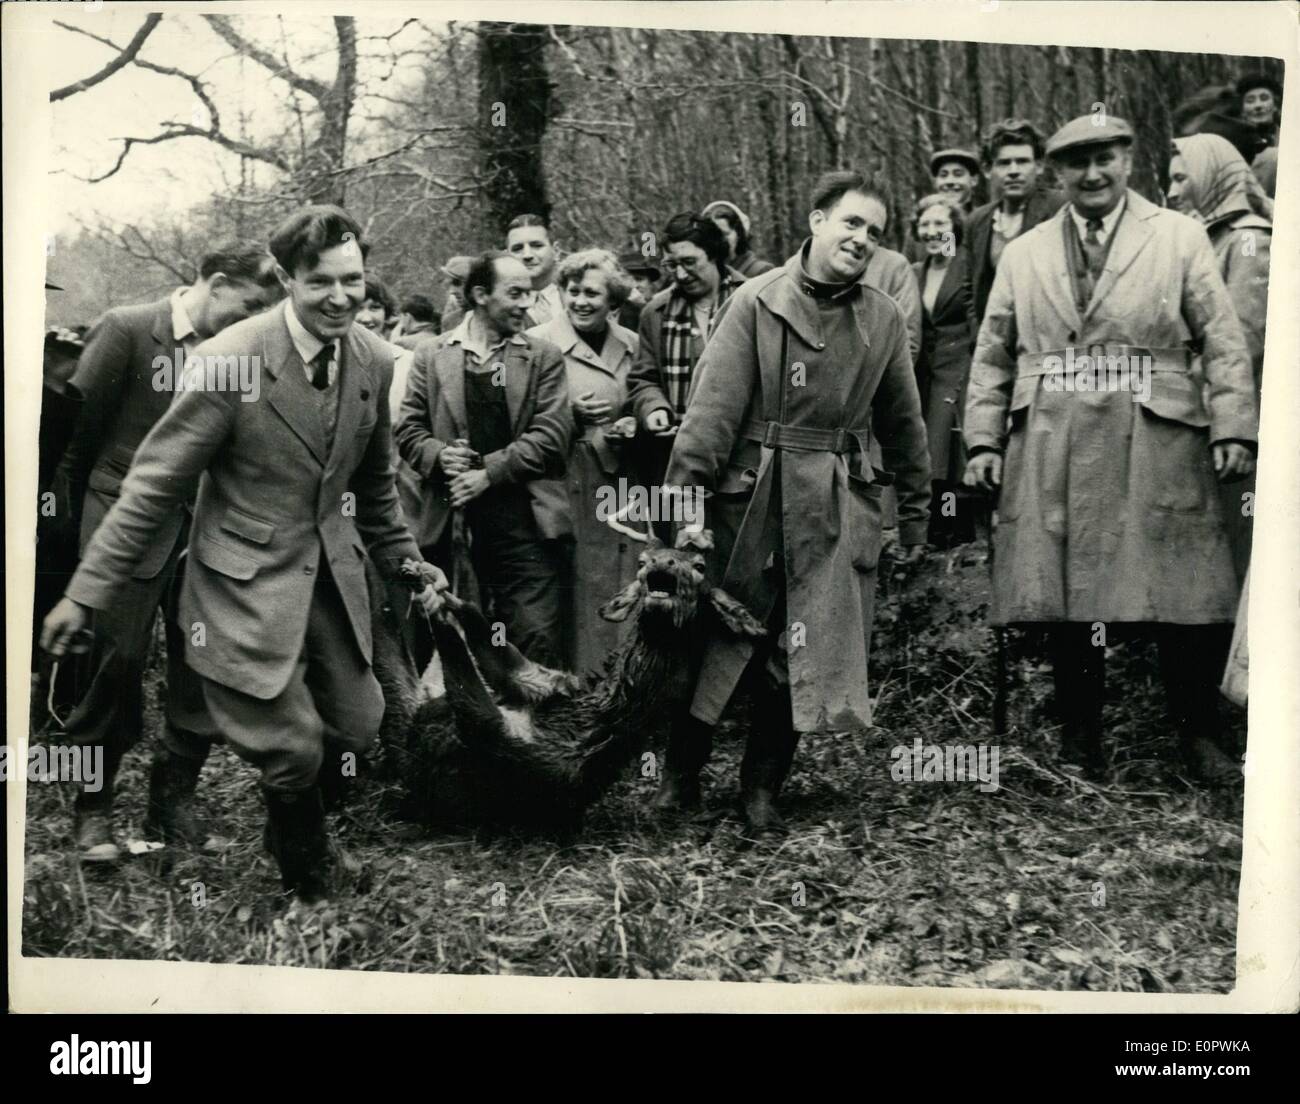 Mar. 03, 1957 - Meet Of The Devon And Somerset Stag Hounds: The Devon and Somerset Stag Hounds met yesterday at the somerset village of Bury.. Mrs. Cecily Norman, of the Ilfracombe branch of the Royal society for the prevention of Cruelty to Animals - took a placard to the meeting bearing the words ''Ilfracombe demands outlaw this cruelty''... Photo shows: Happy expression on the faces of members of the Hunt as they carry the stag - at the end of the Hunt.. In its desprate bid to escape the animal plunged into the River Barle, near Dulverton Stock Photo